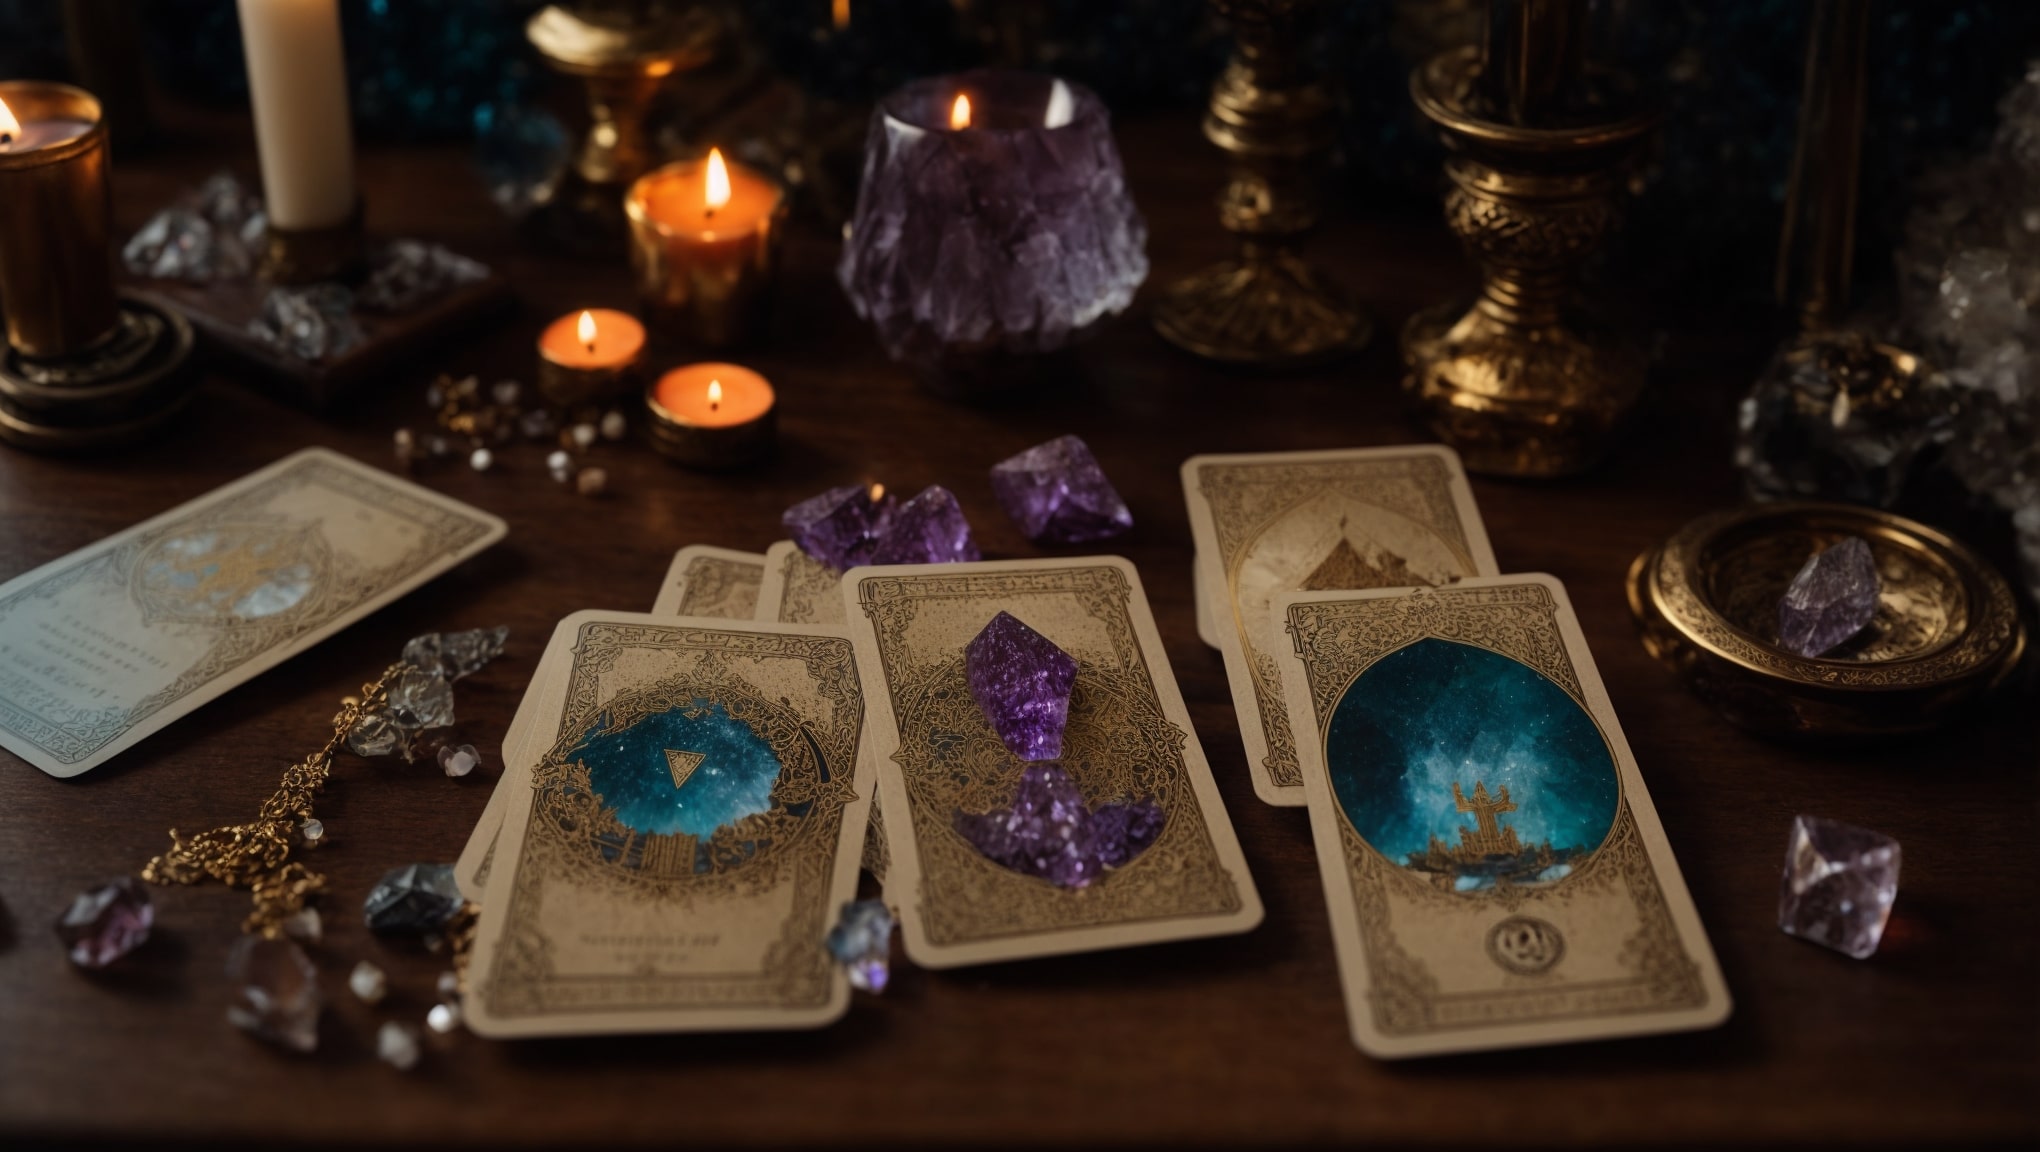 Six Tarot cards from the Minor Arcana on an old table with crystals, candles, incense, and a star map, for a minor arcana tarot interpretation guide.